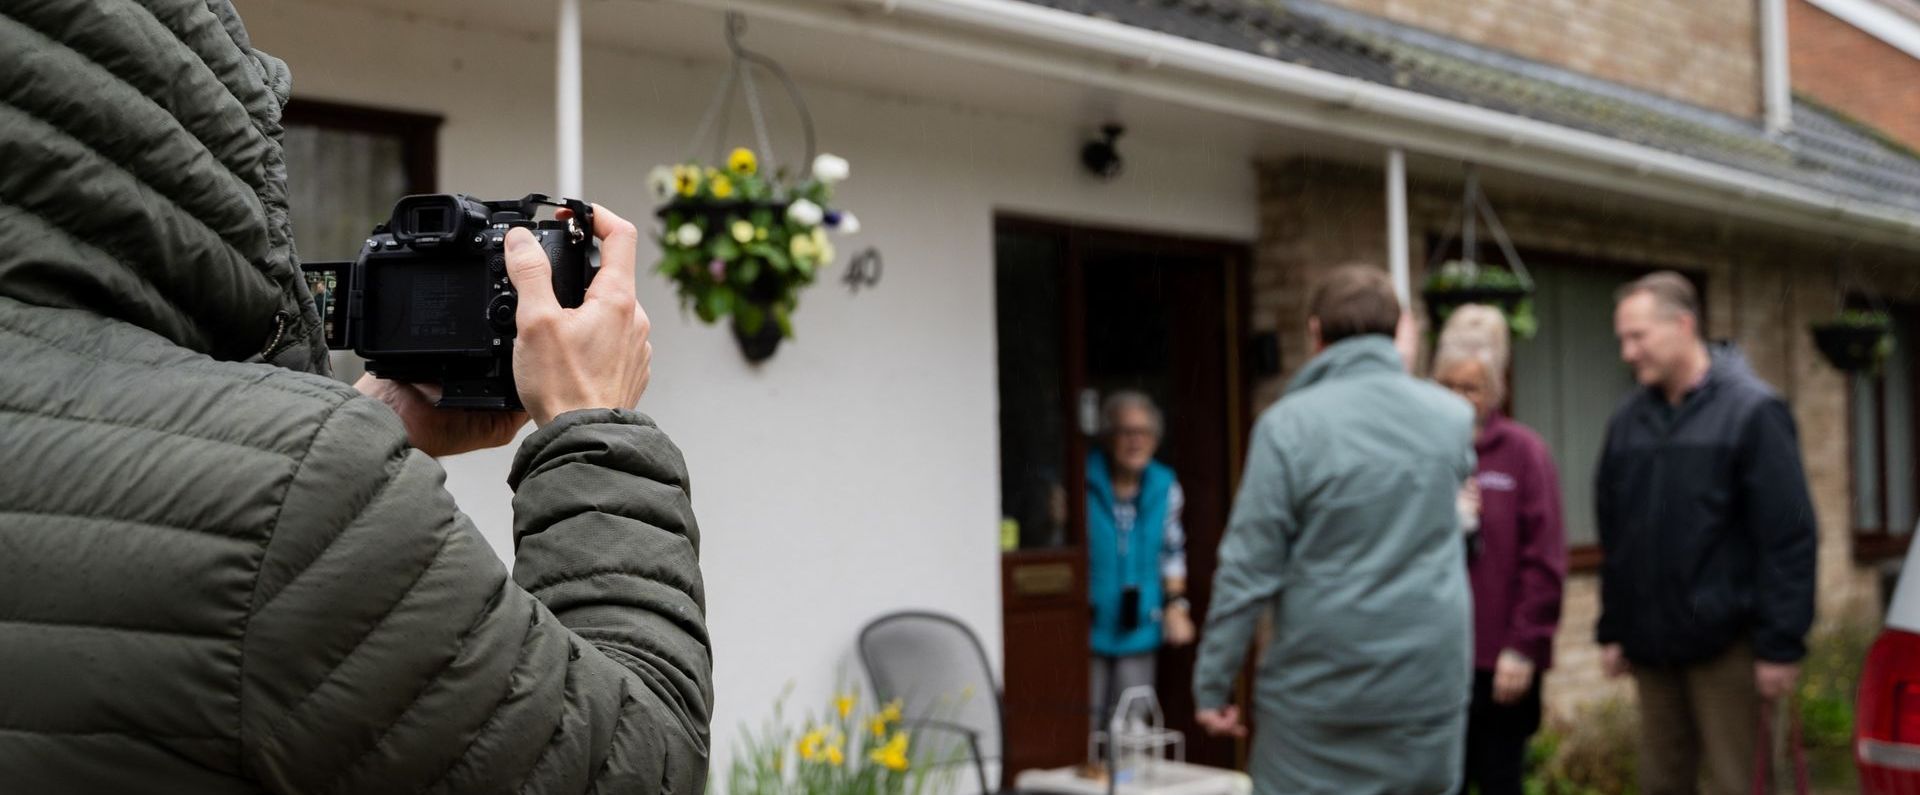 A man is taking a picture of a group of people standing outside of a house.